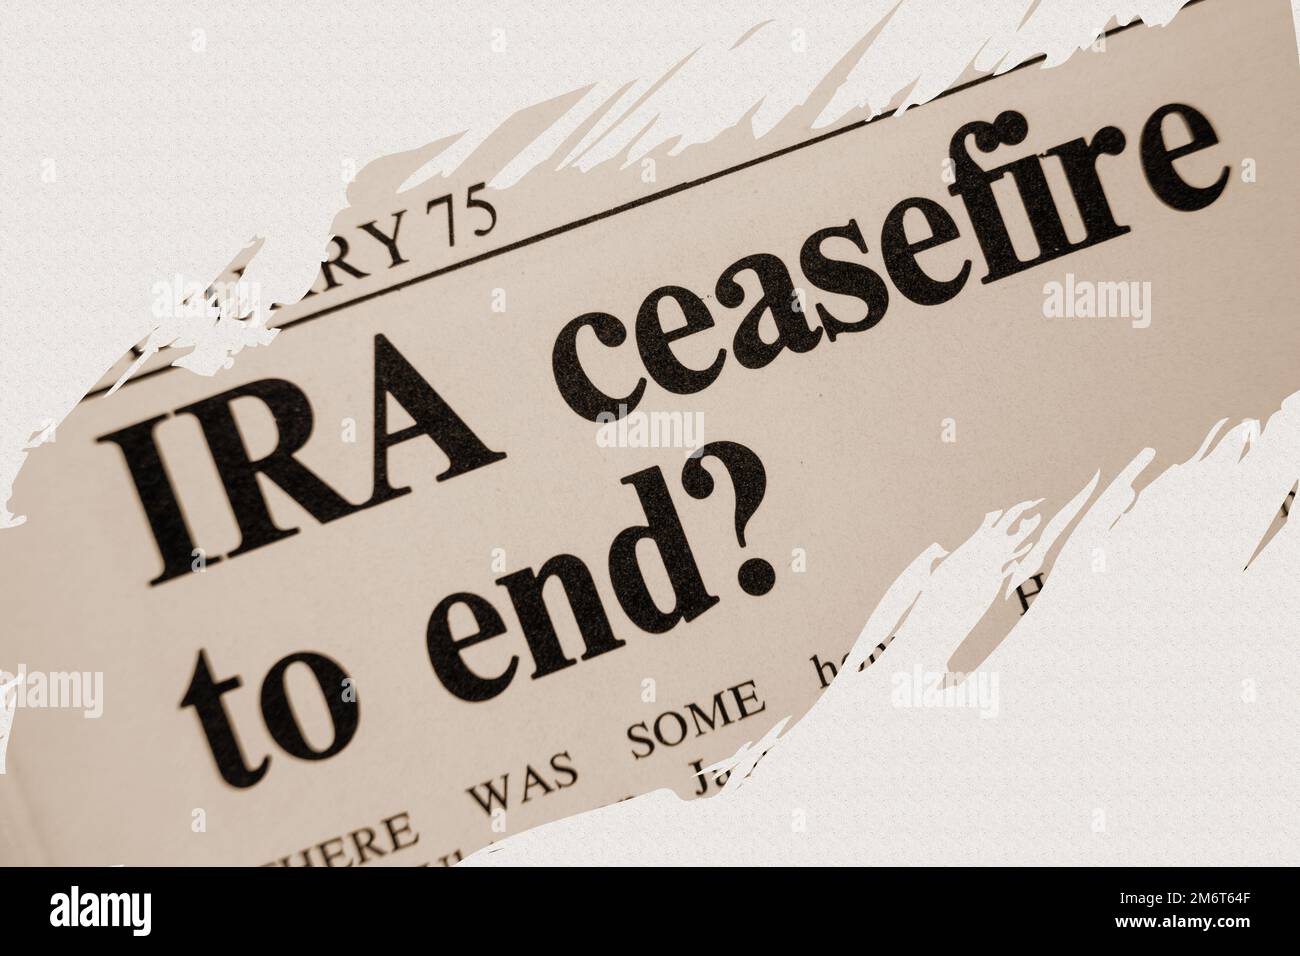 news story from 1975 newspaper headline article title - IRA ceasefire to end in sepia Stock Photo